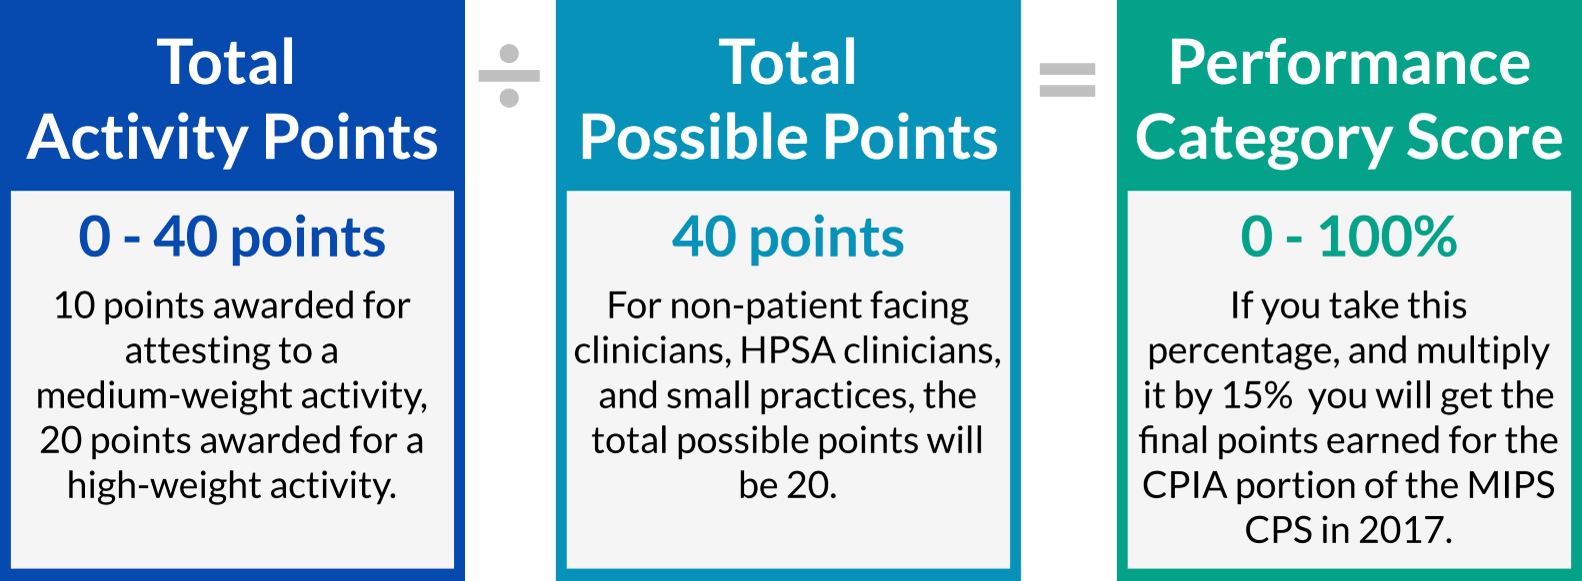 total activity points / total possible points = cpia performance category score